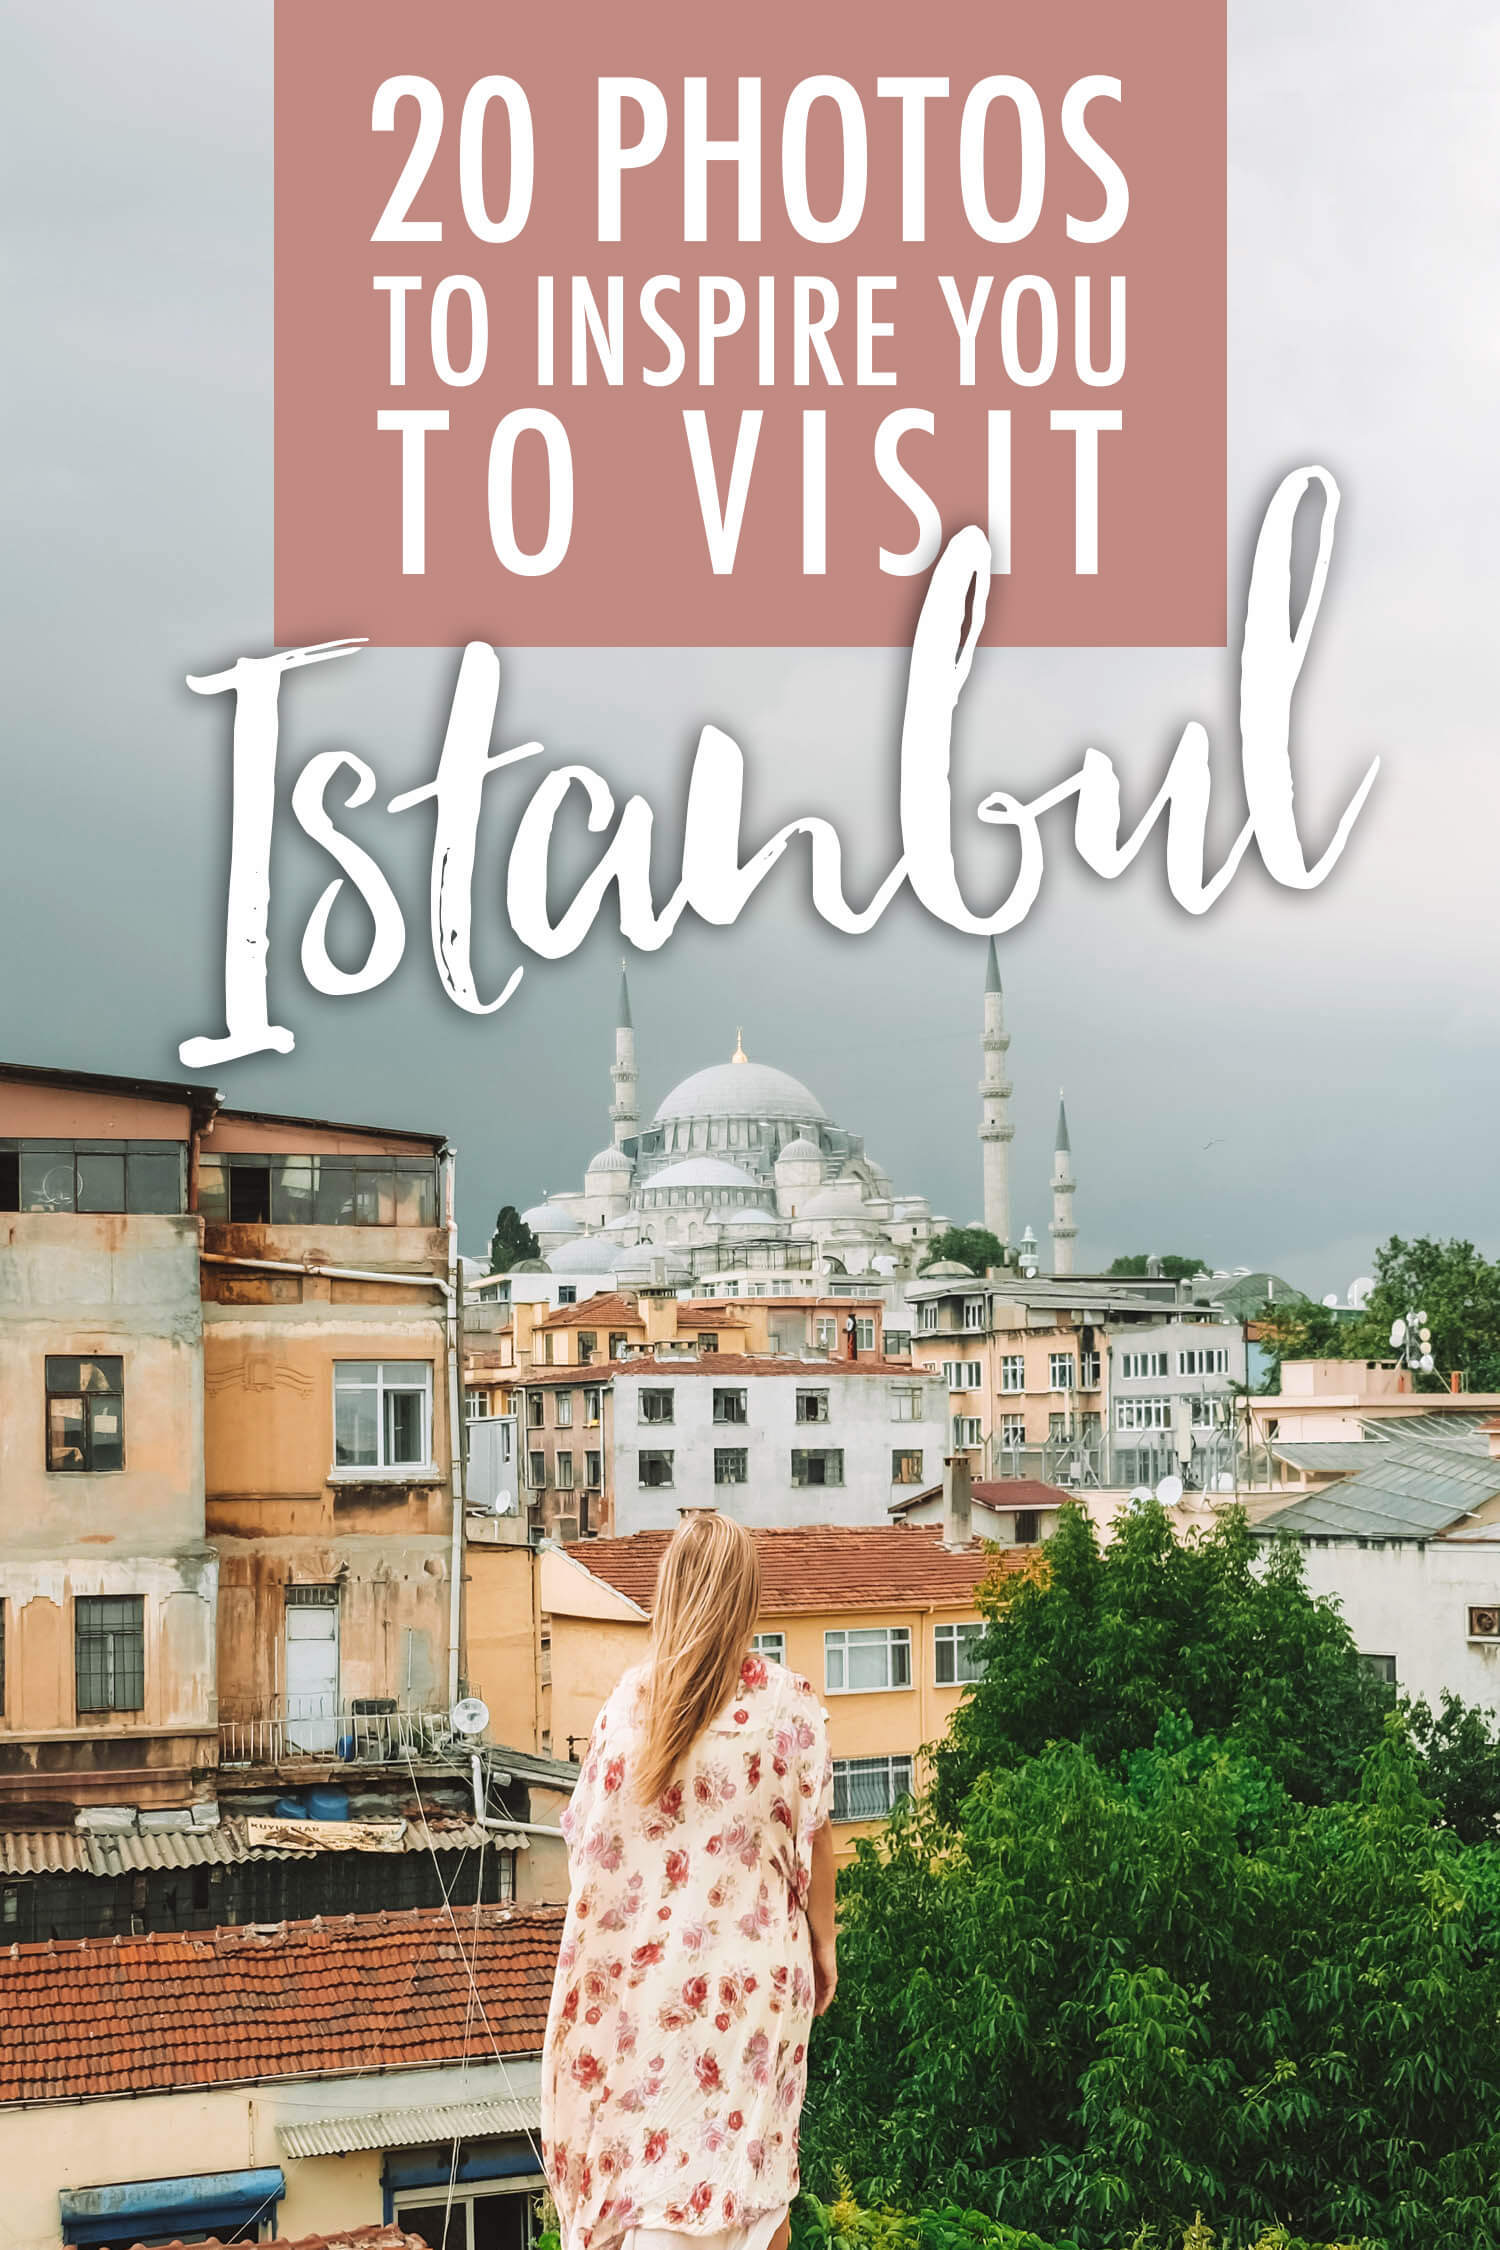 20 Photos to Inspire You to Visit Istanbul